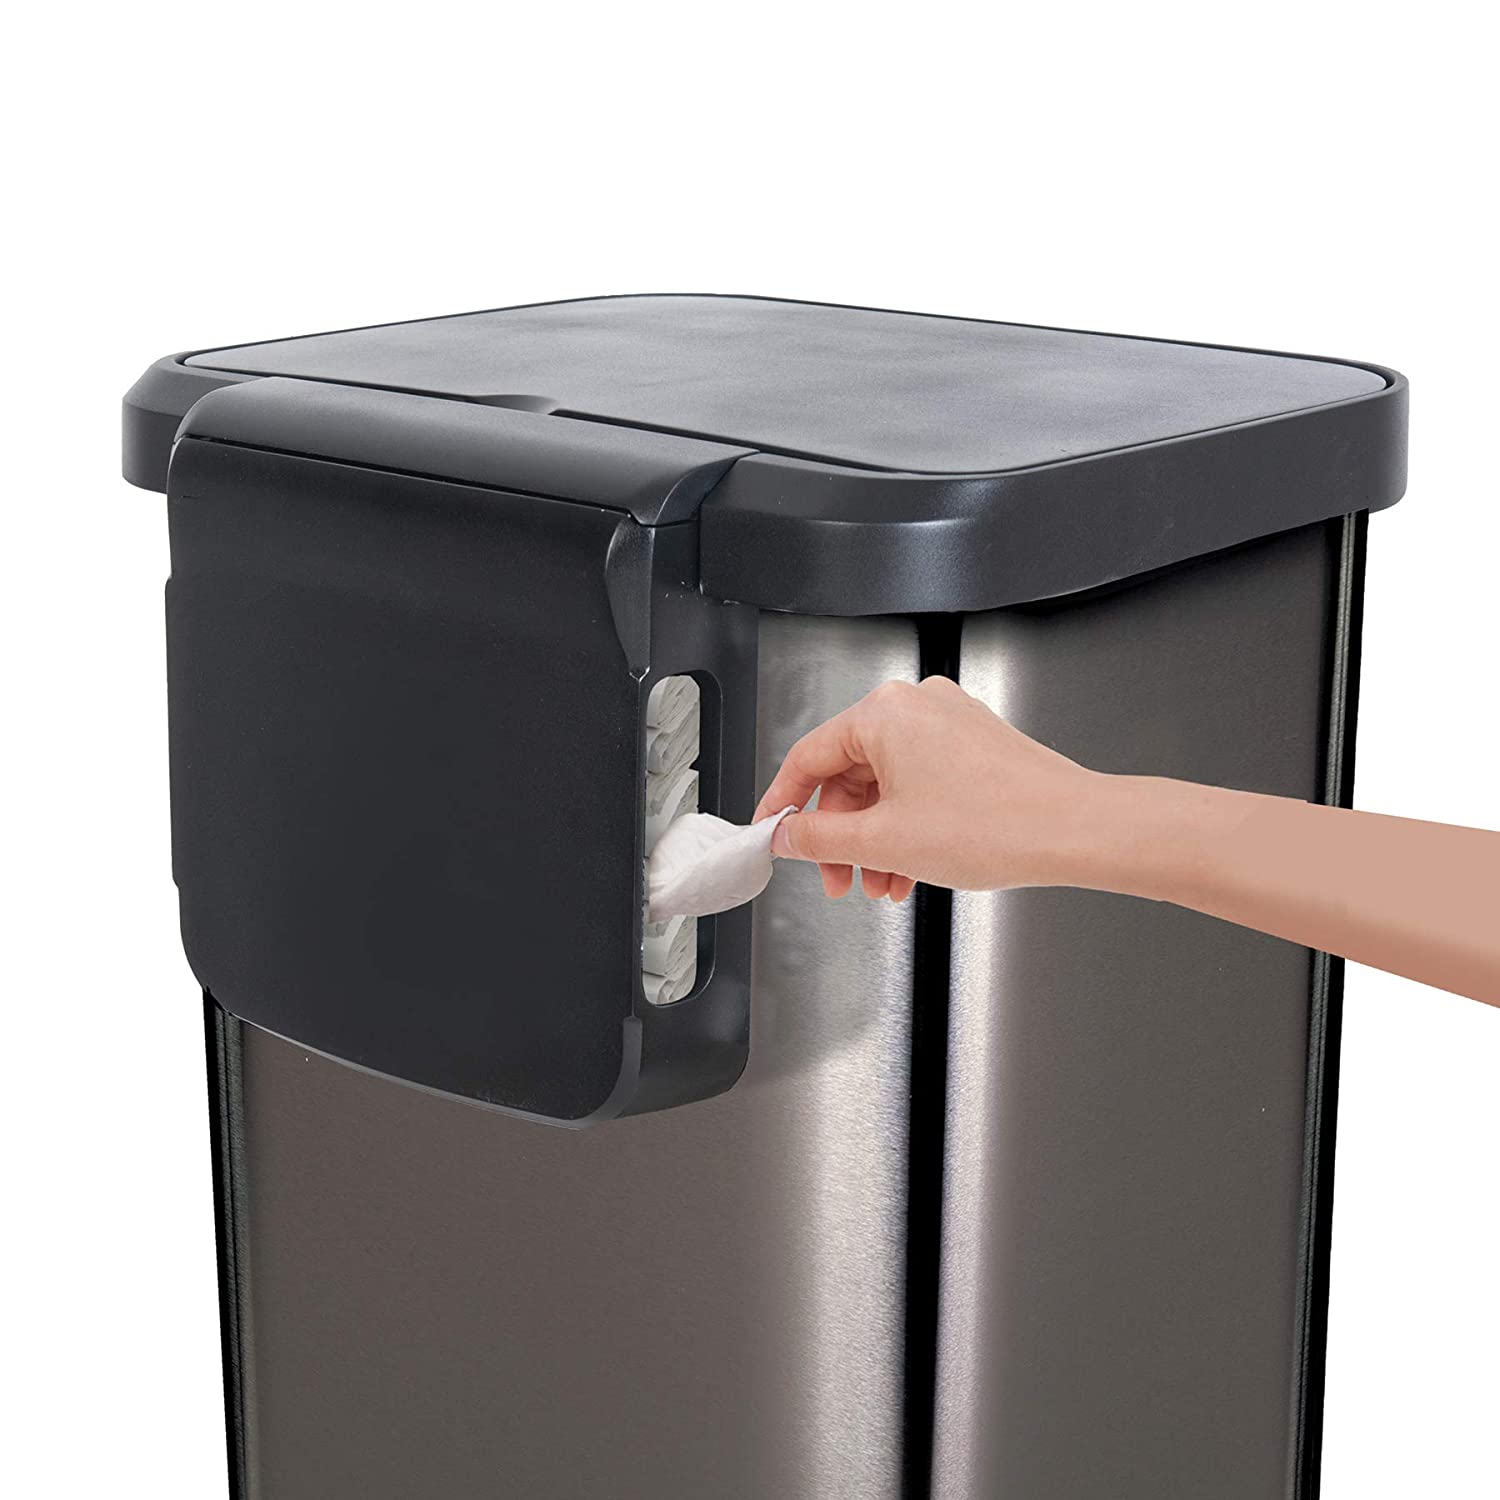 https://bigbigmart.com/wp-content/uploads/2023/05/Glad-20-Gallon-75.5-Liter-Extra-Capacity-Stainless-Steel-Step-Trash-Can-with-CloroxTM-Odor-Protection-Pewter3.jpg